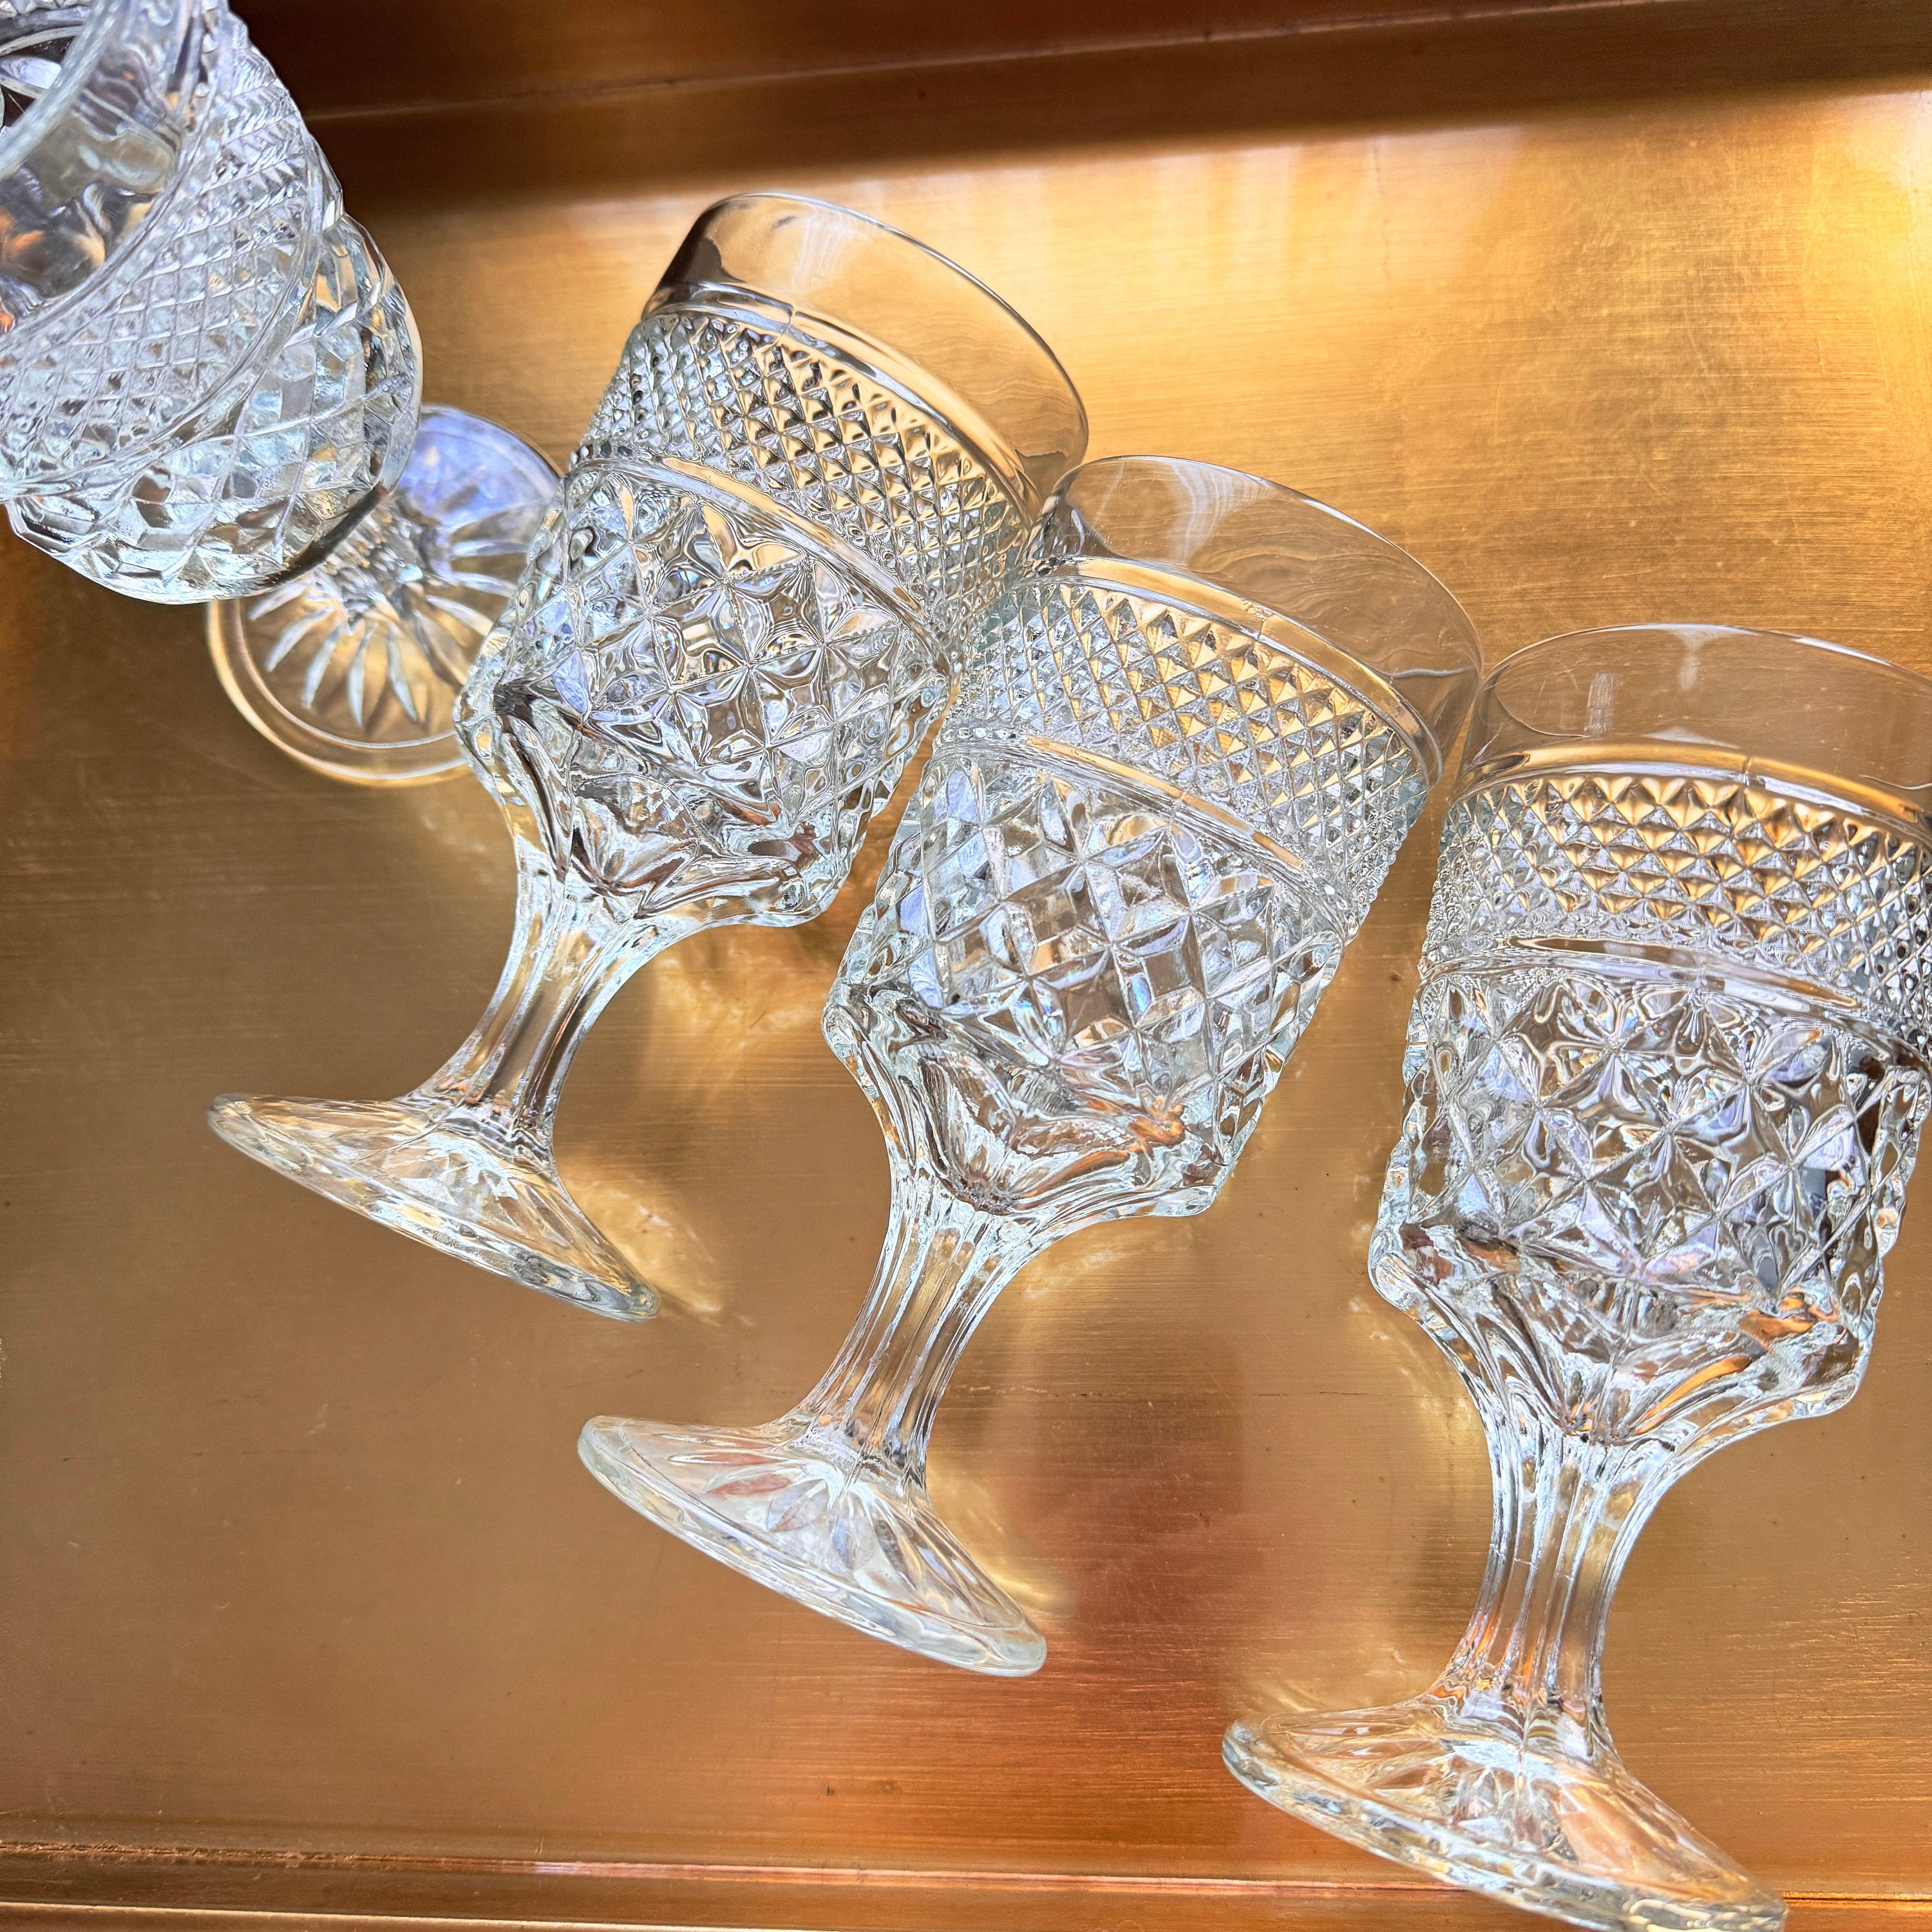 VTG Anchor Hocking Cut Diamond Quilted Pattern Clear Glass Drinking Glasses  (4)